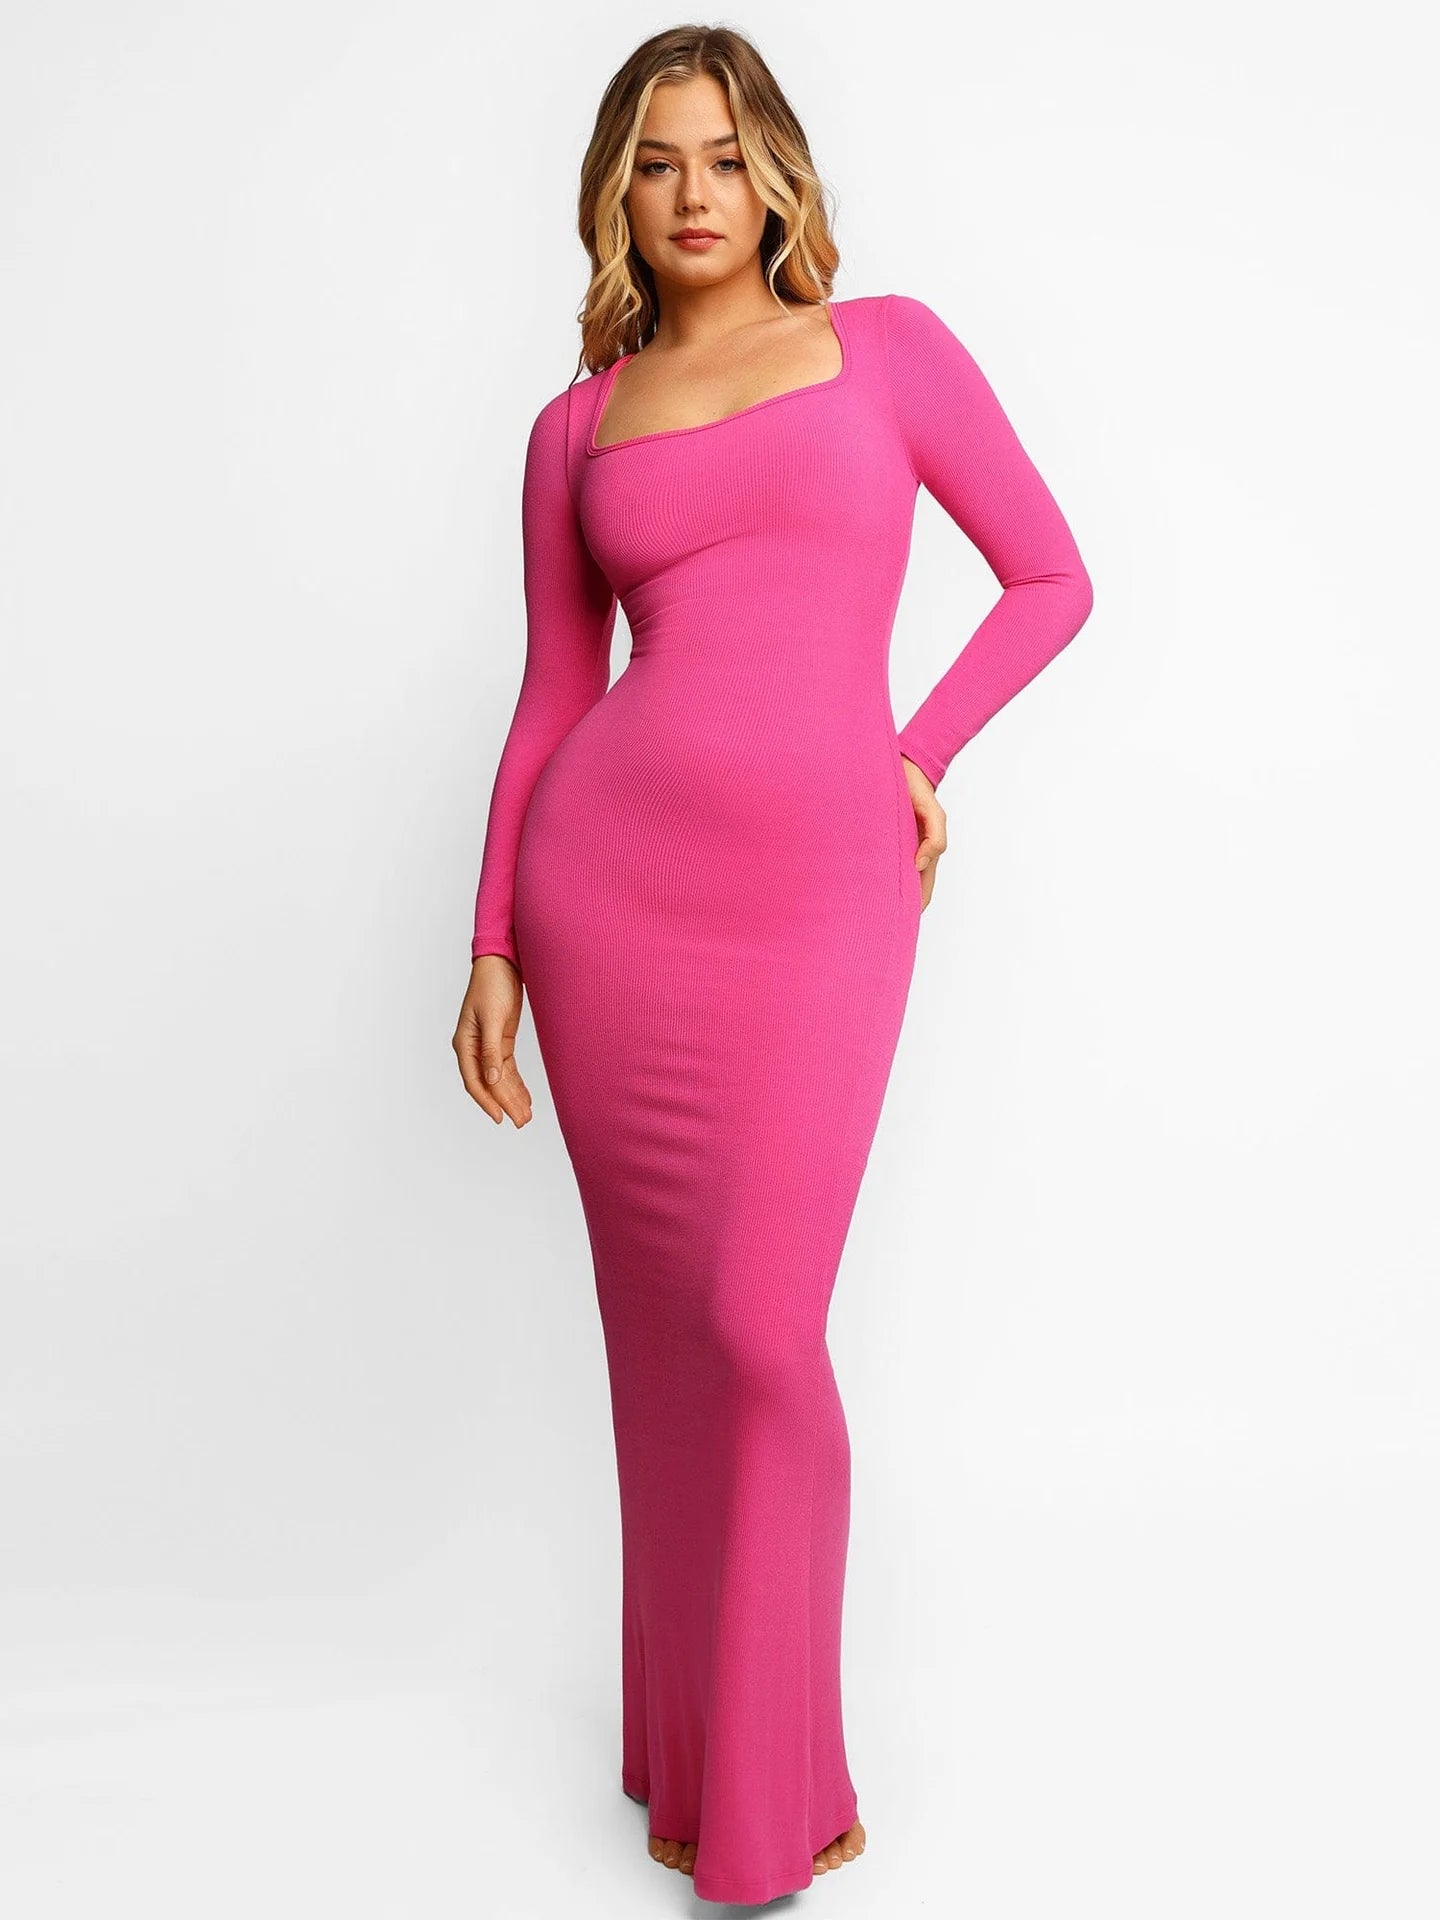 Want Perfect Curves? Try Popilush Shapewear Dresses for Stunning